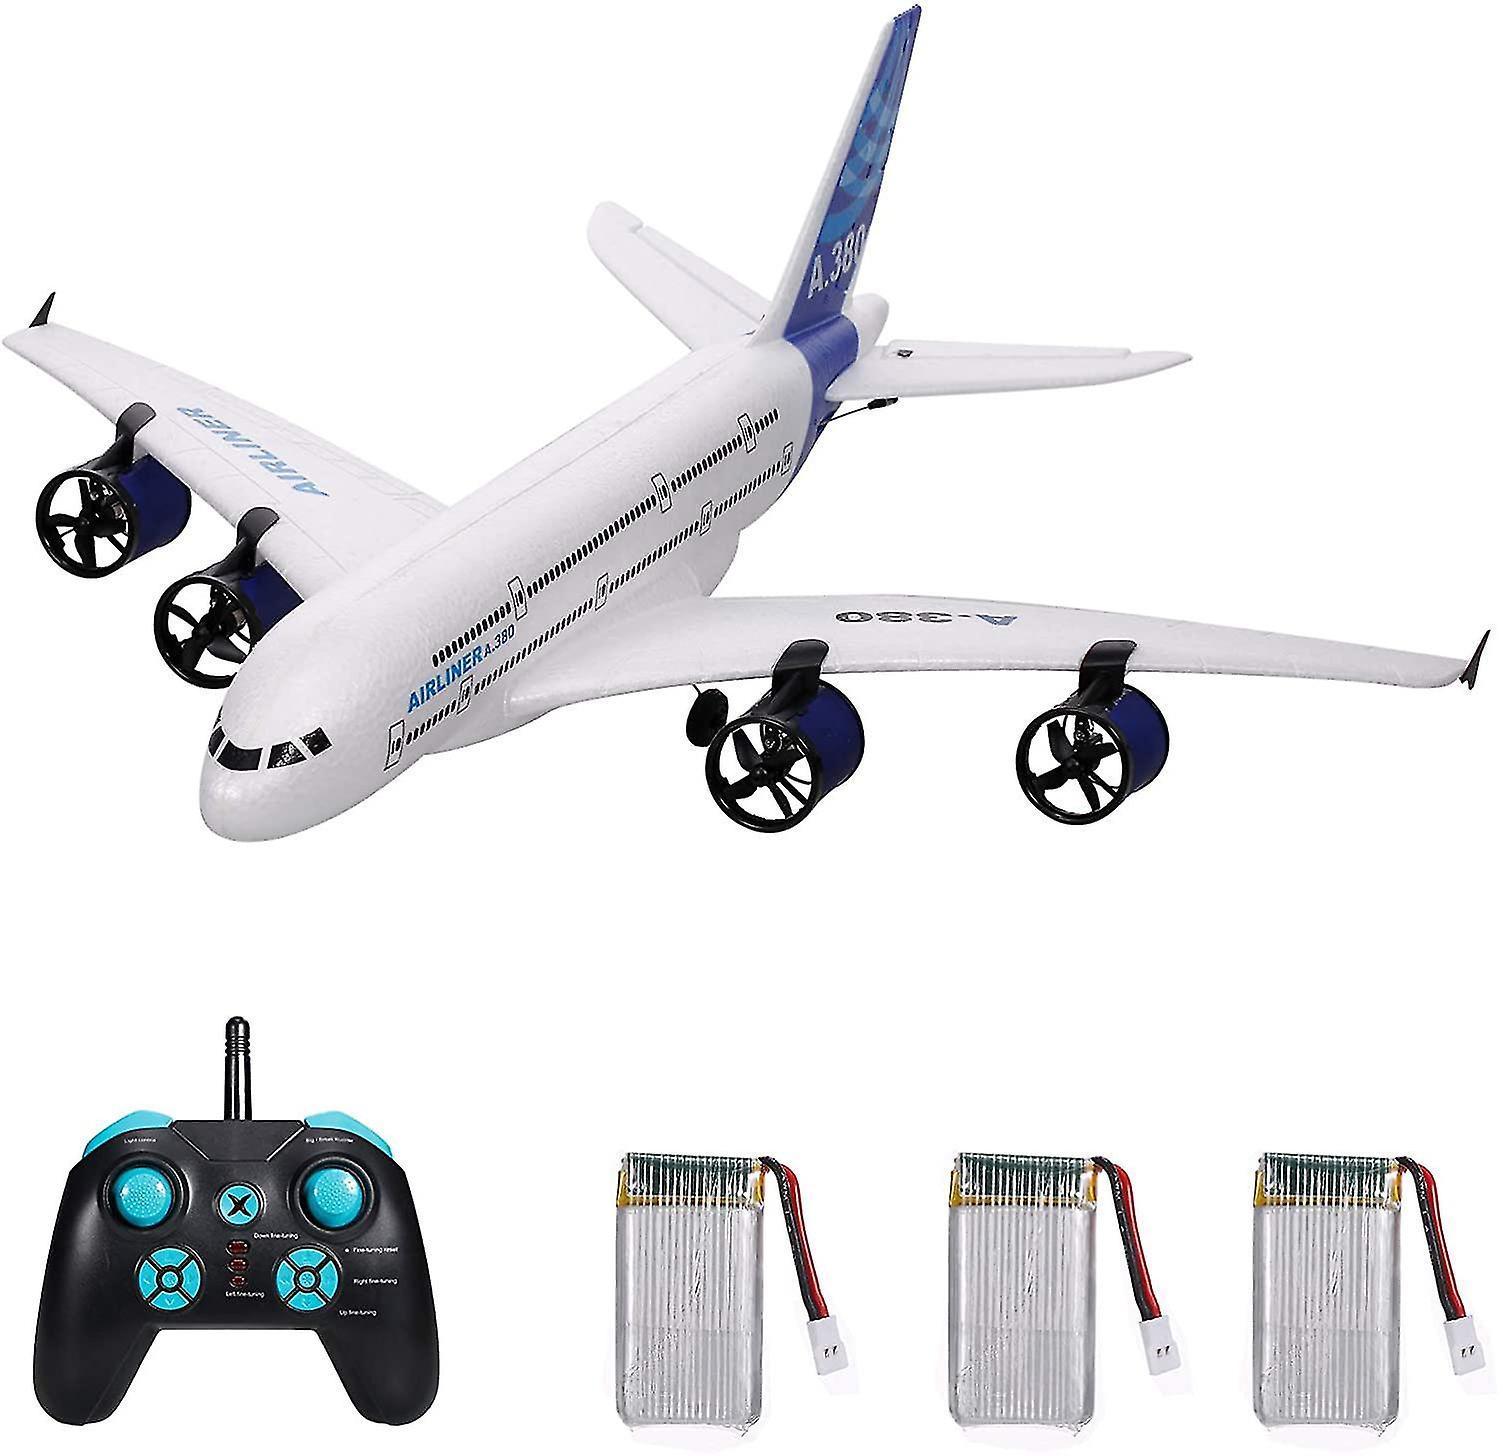 Aeroplane With Remote Toy: Comparing popular models of aeroplanes with remote toys